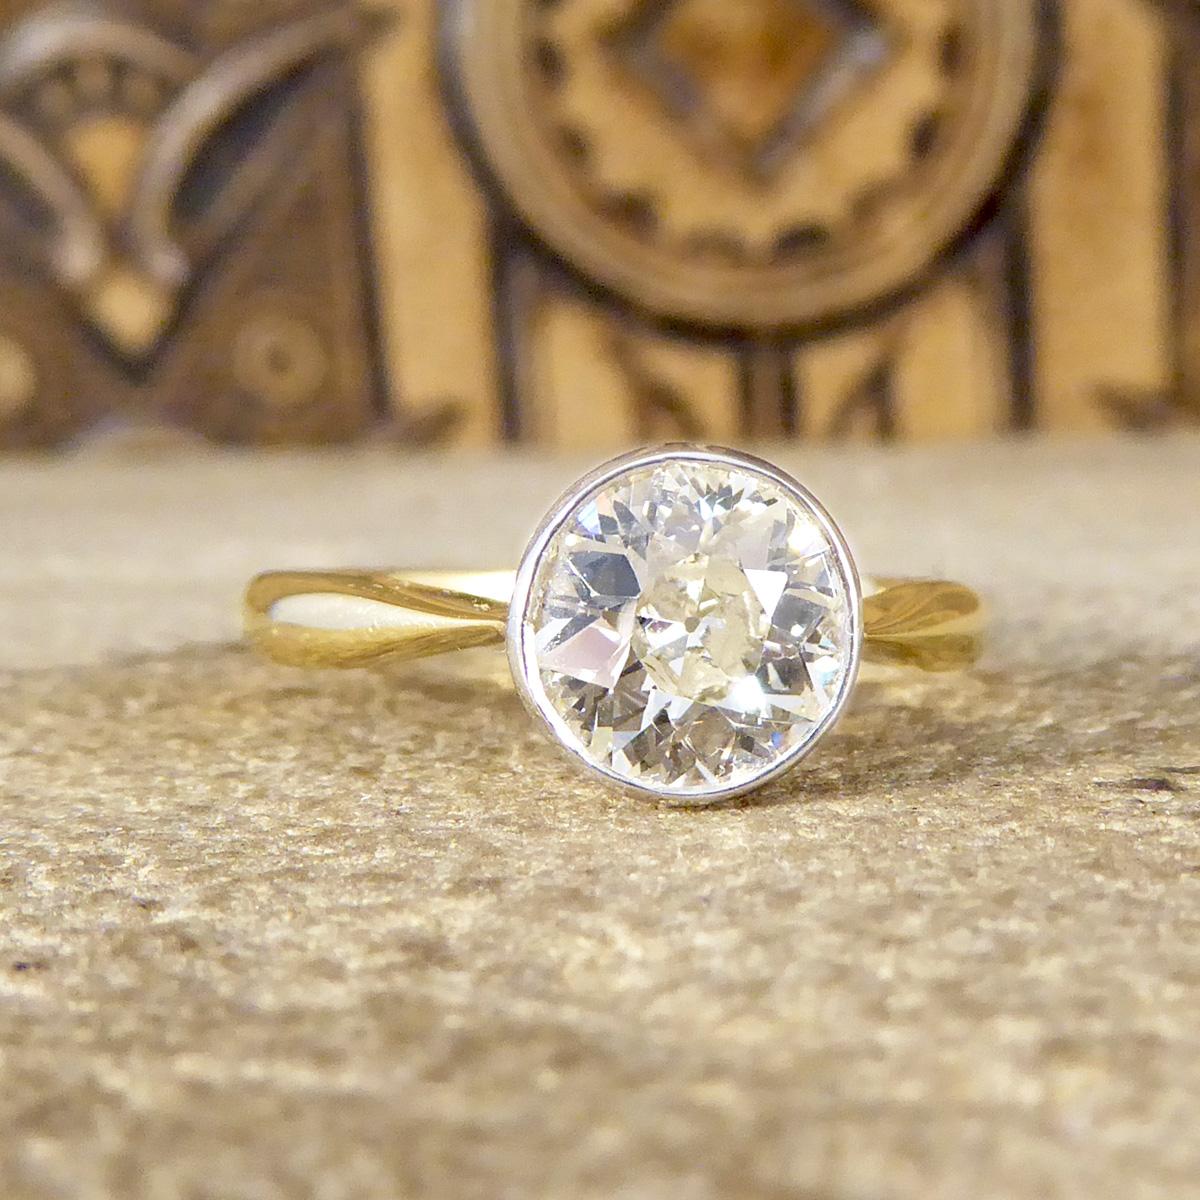 This ring would make the perfect engagement ring set with a Old European Cut Diamond weighing 1.25ct in a bezel setting. The bezel setting allows the Diamond to be held in place securely with full coverage meaning it is very practical for everyday